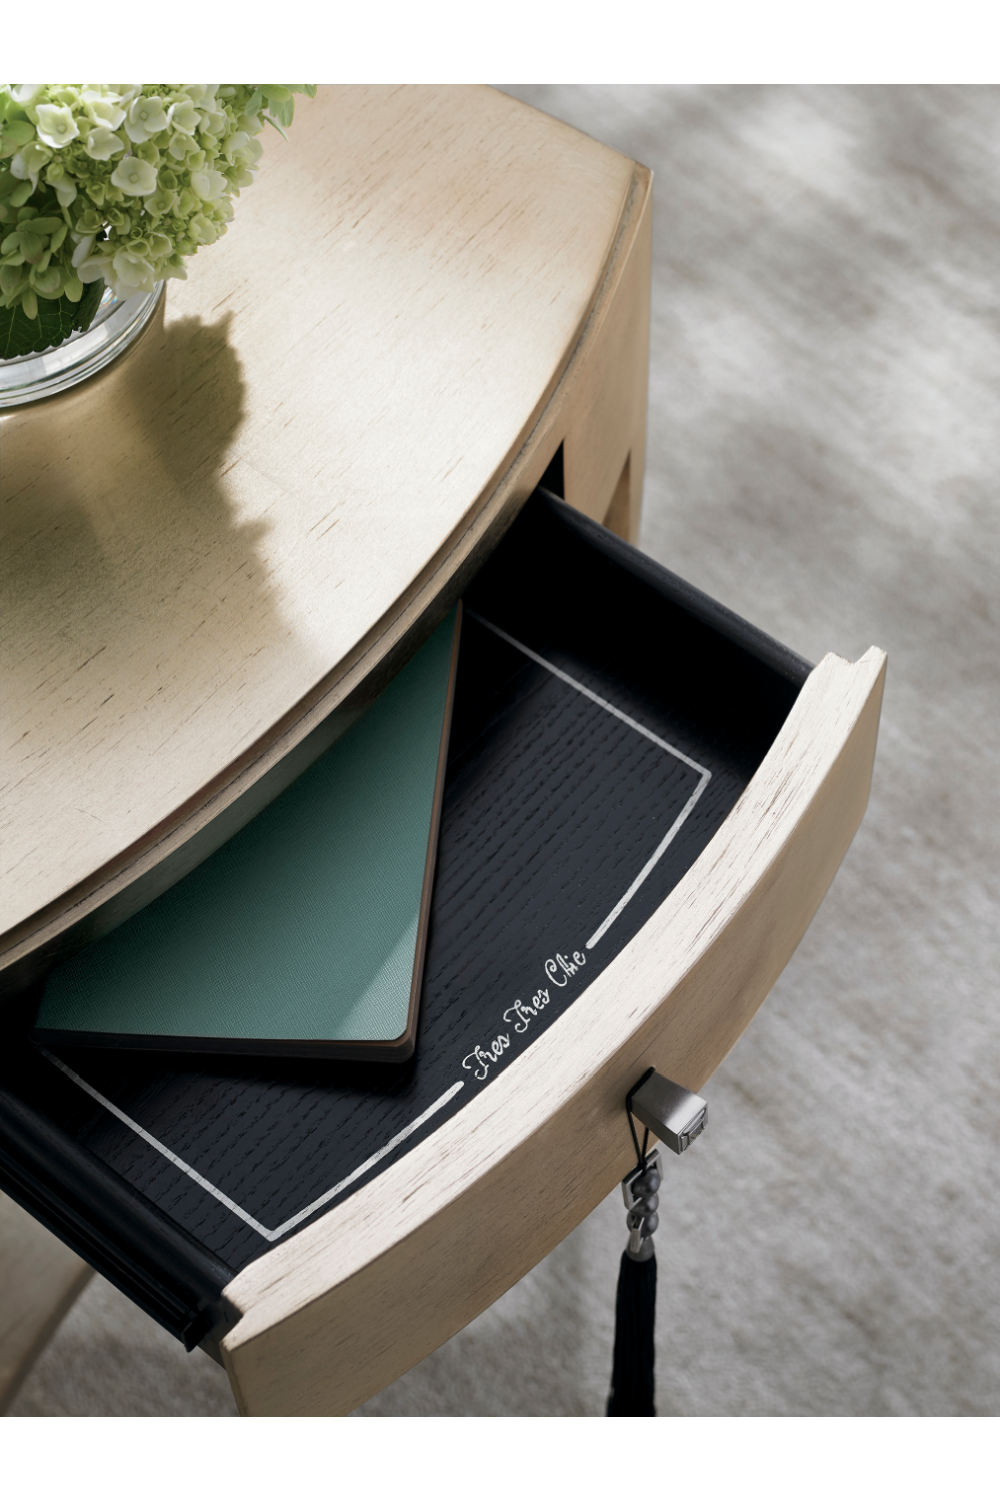 Gold 1-Drawer Accent Table | Caracole Tres, Tres Chic | Oroa.com